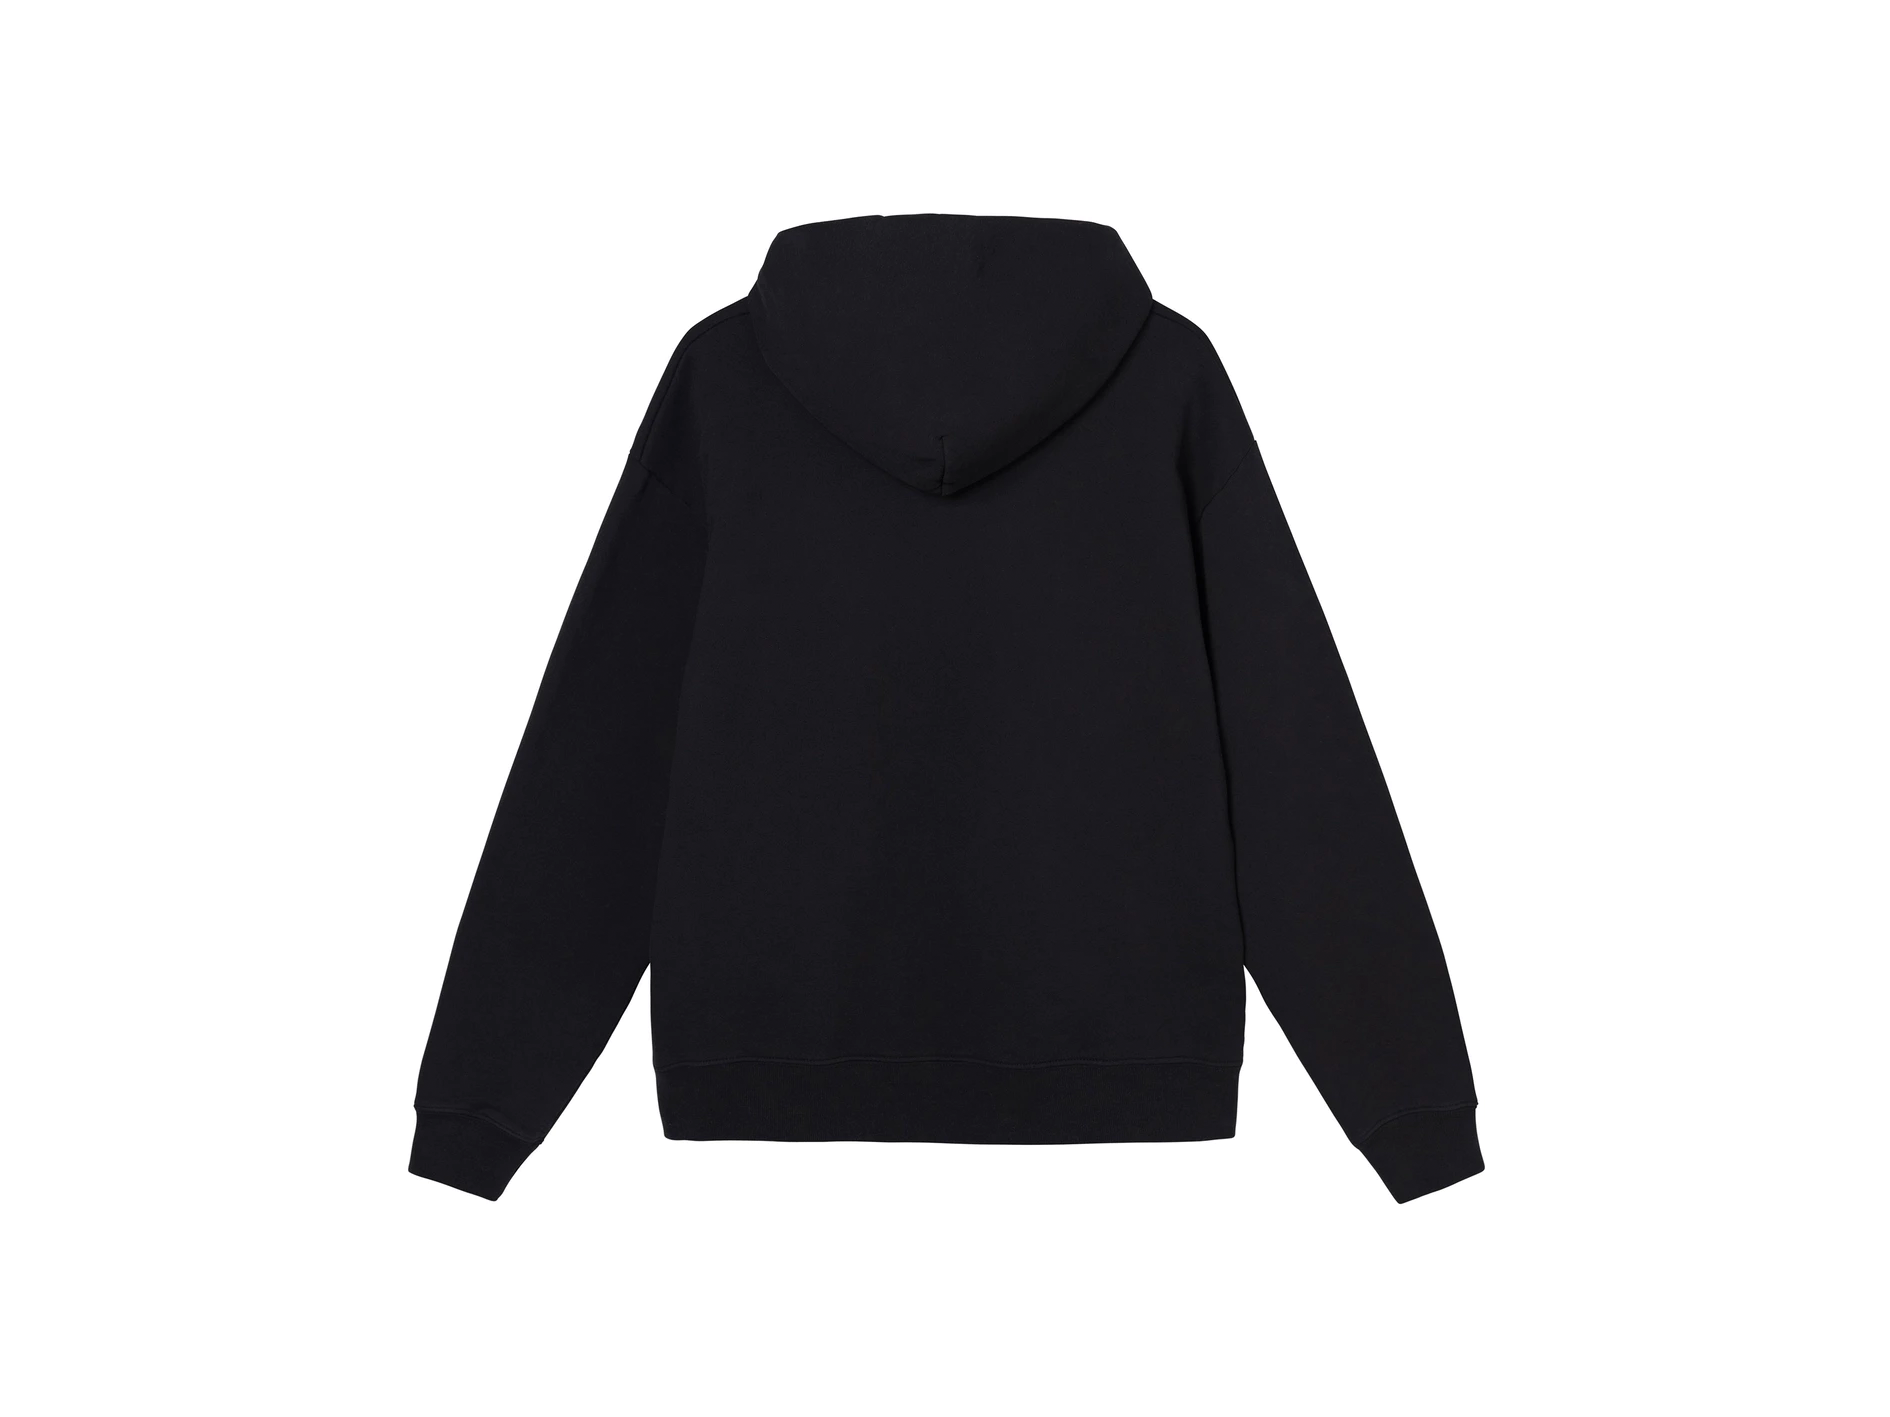 Stussy x CPFM Pull-Over Heart Hoodie